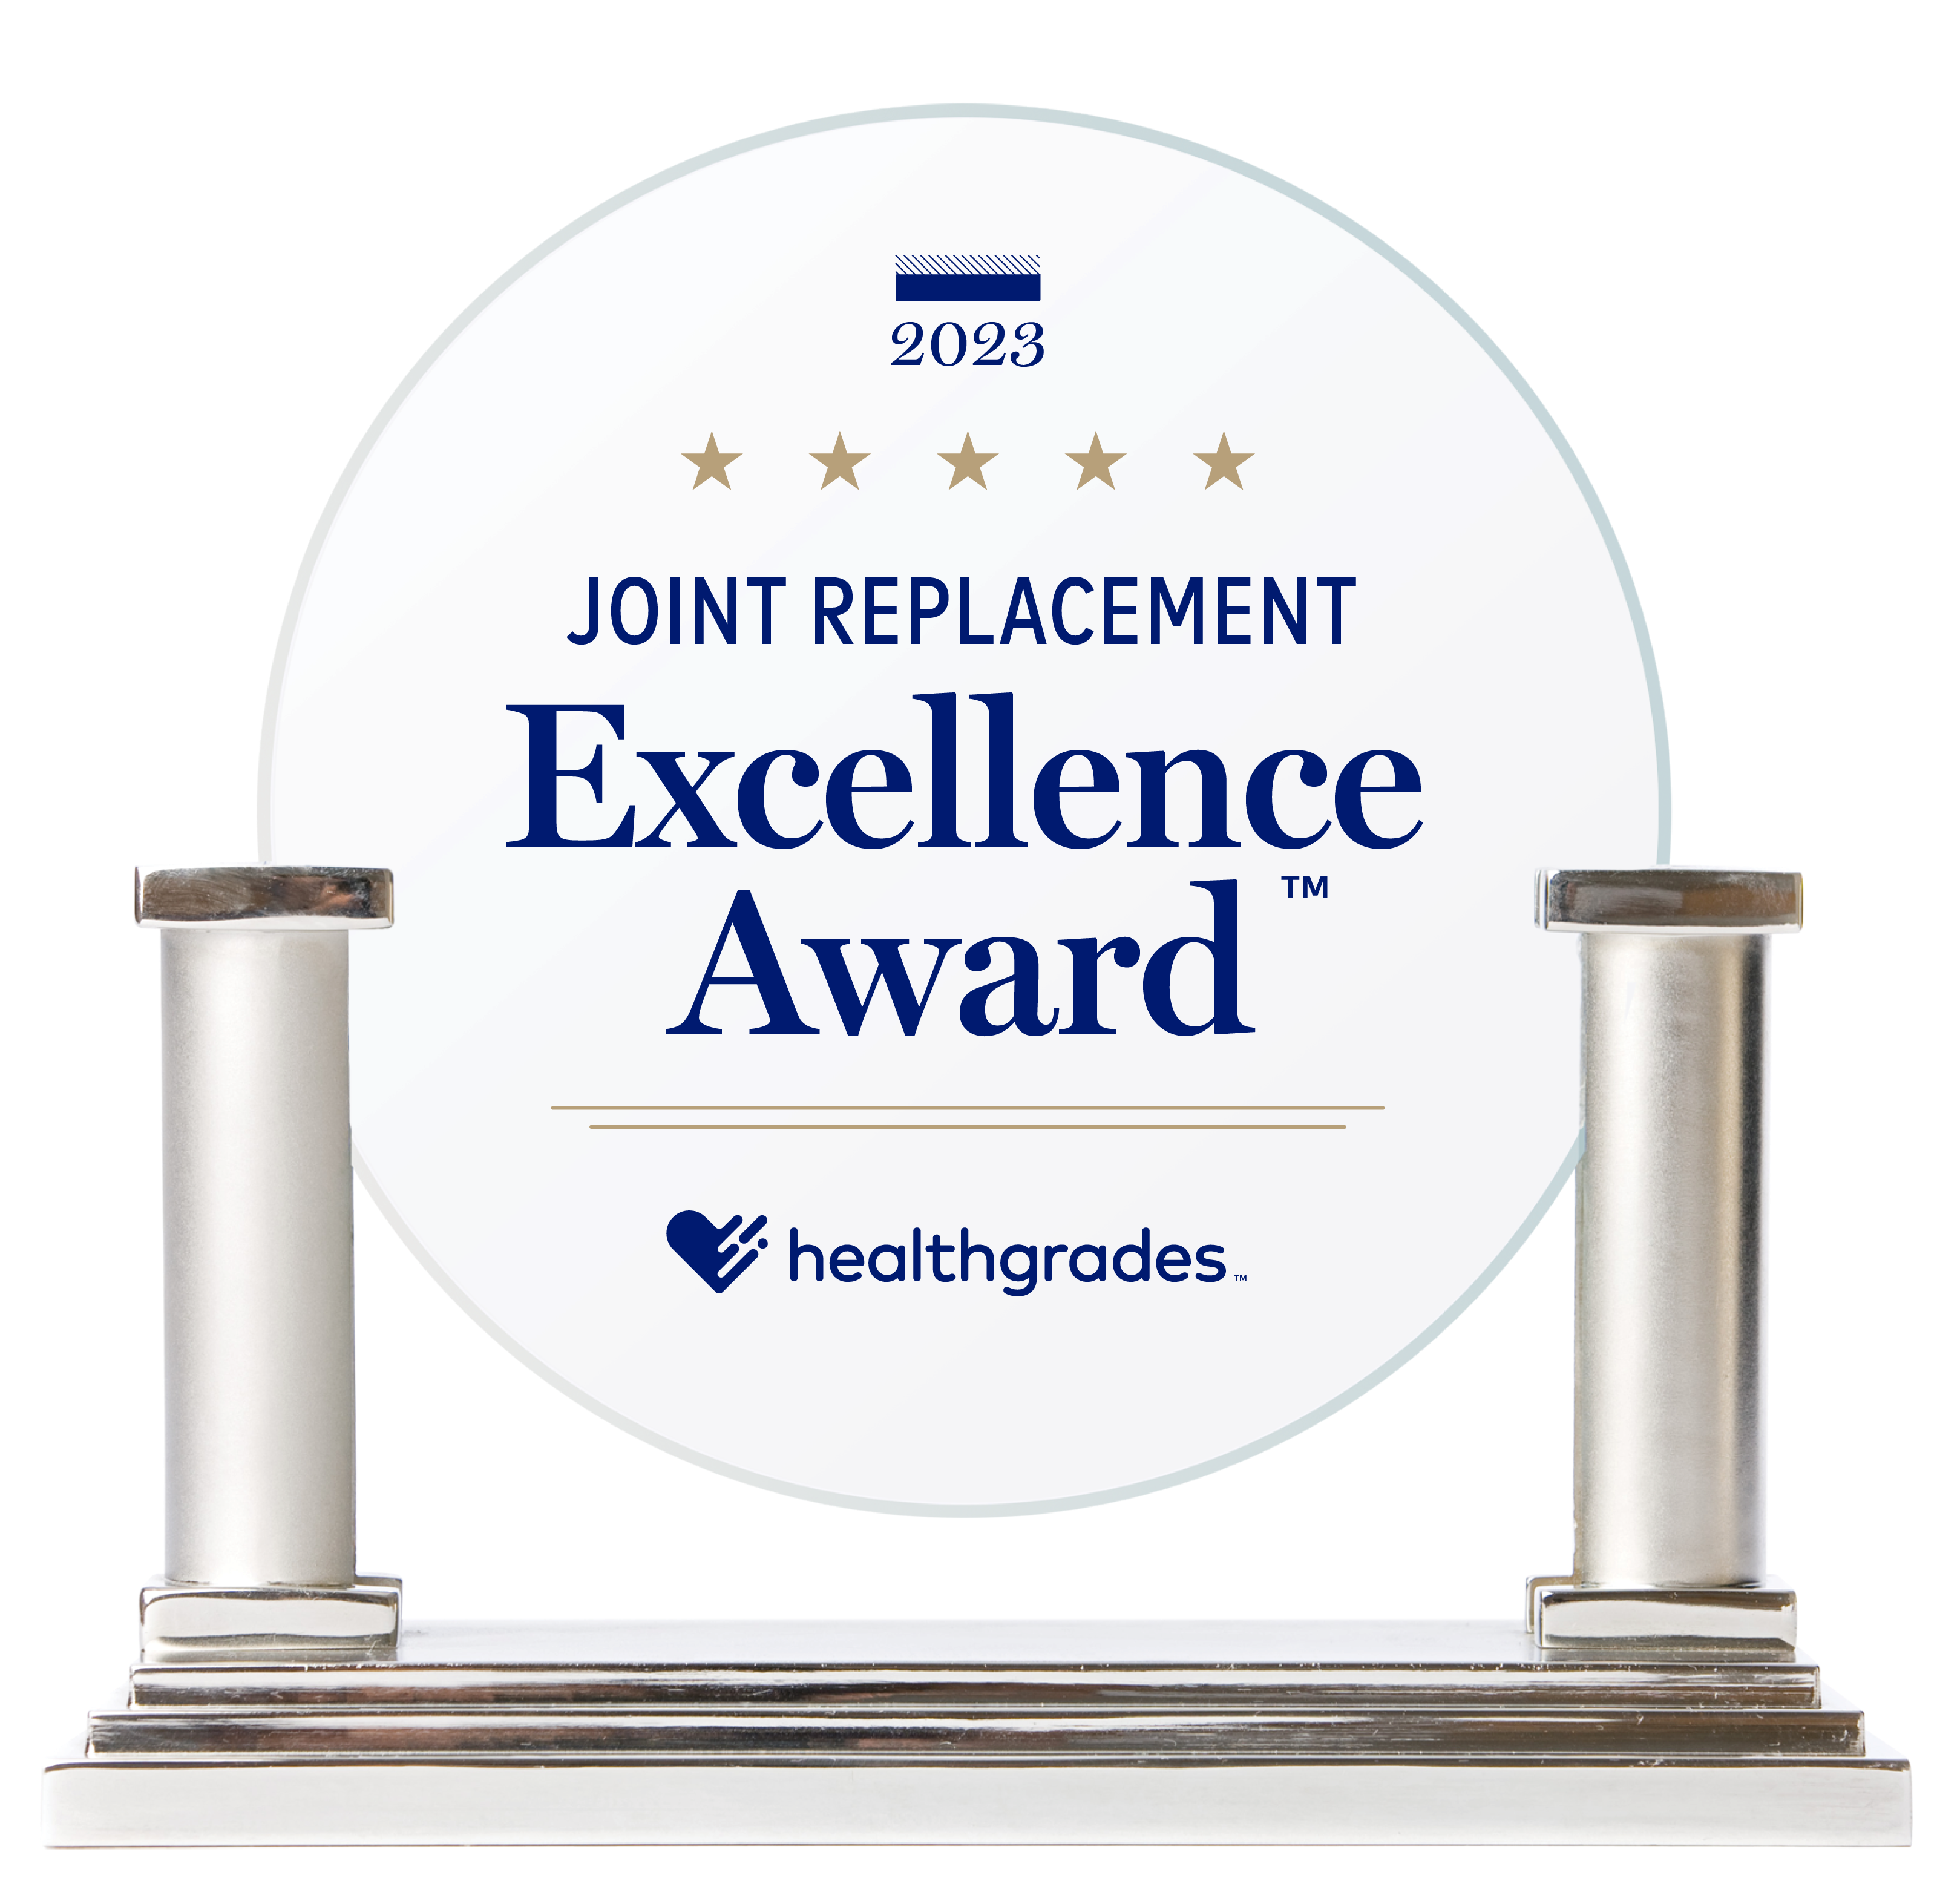 Joint Replacement Excellence Award Healthgrades